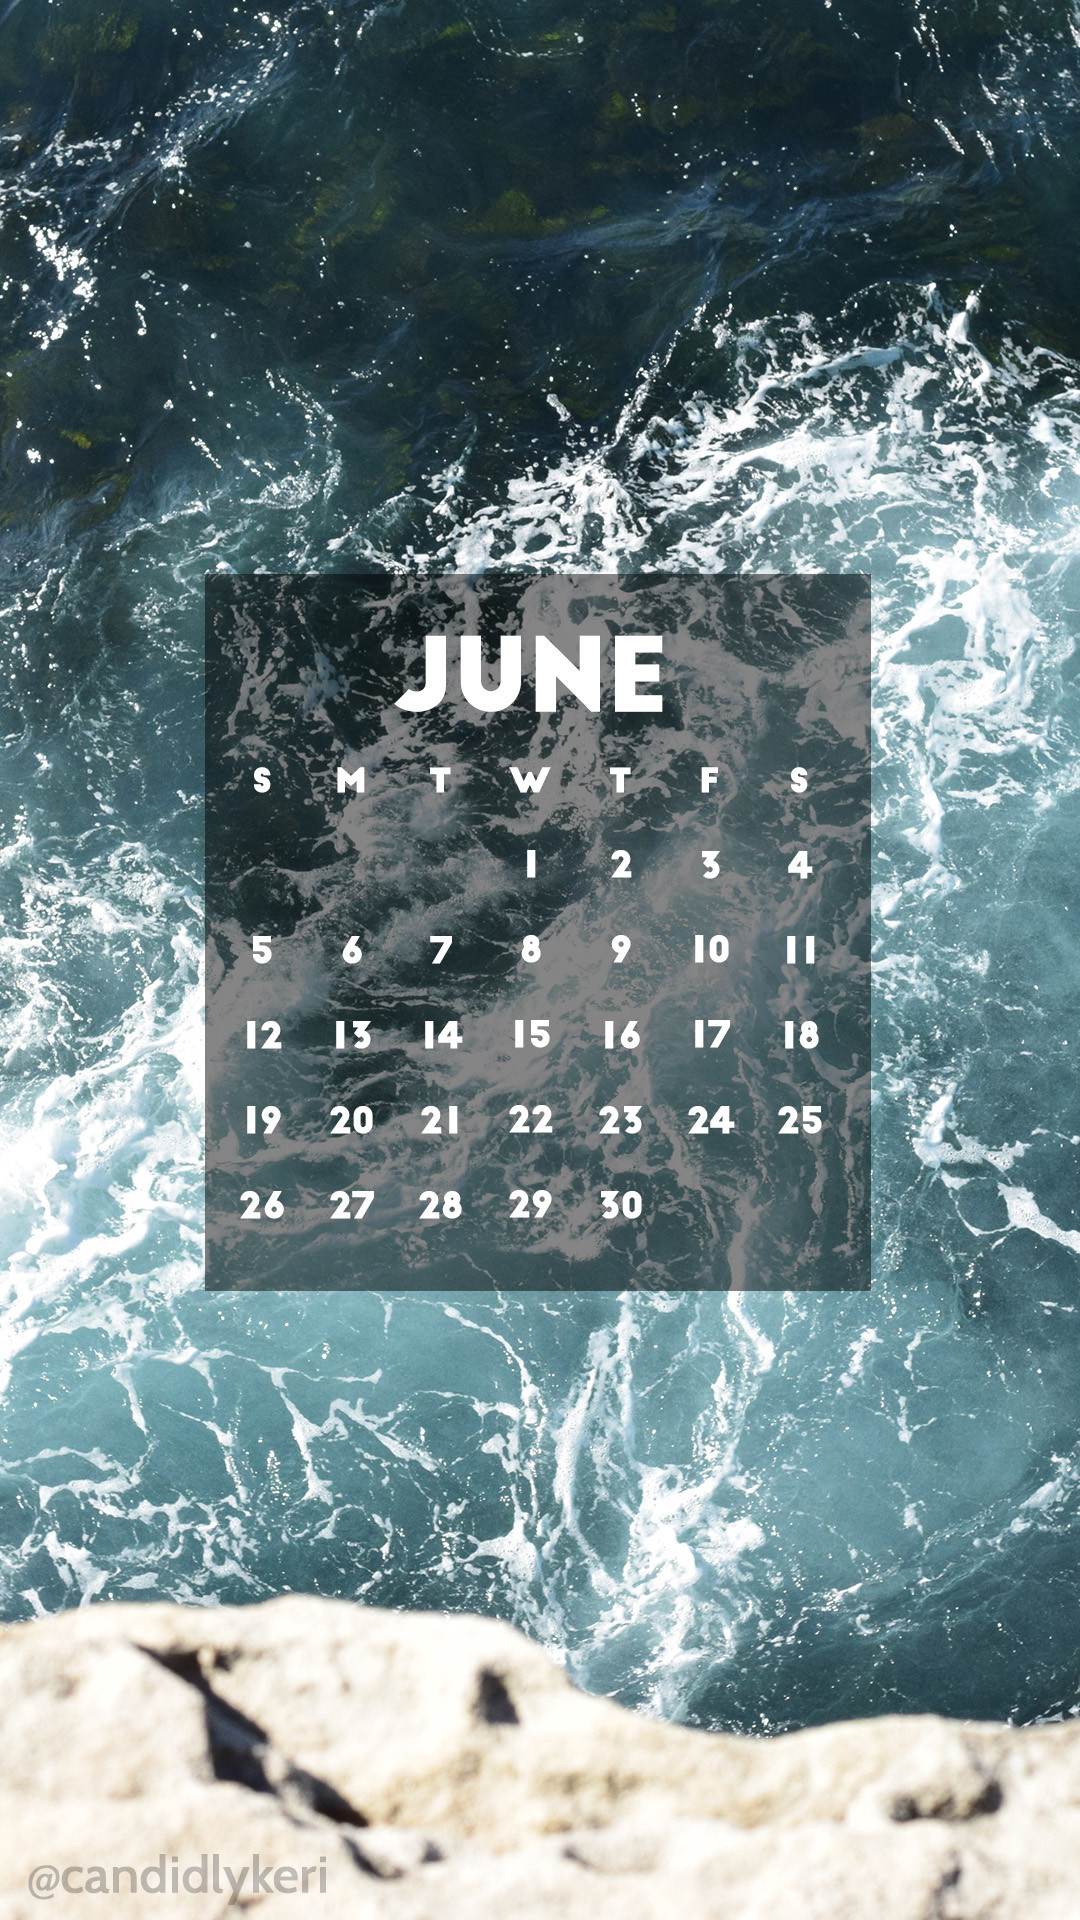 1080x1920 Ocean waves June 2016 calendar wallpaper free download for iPhone android  or desktop background on the